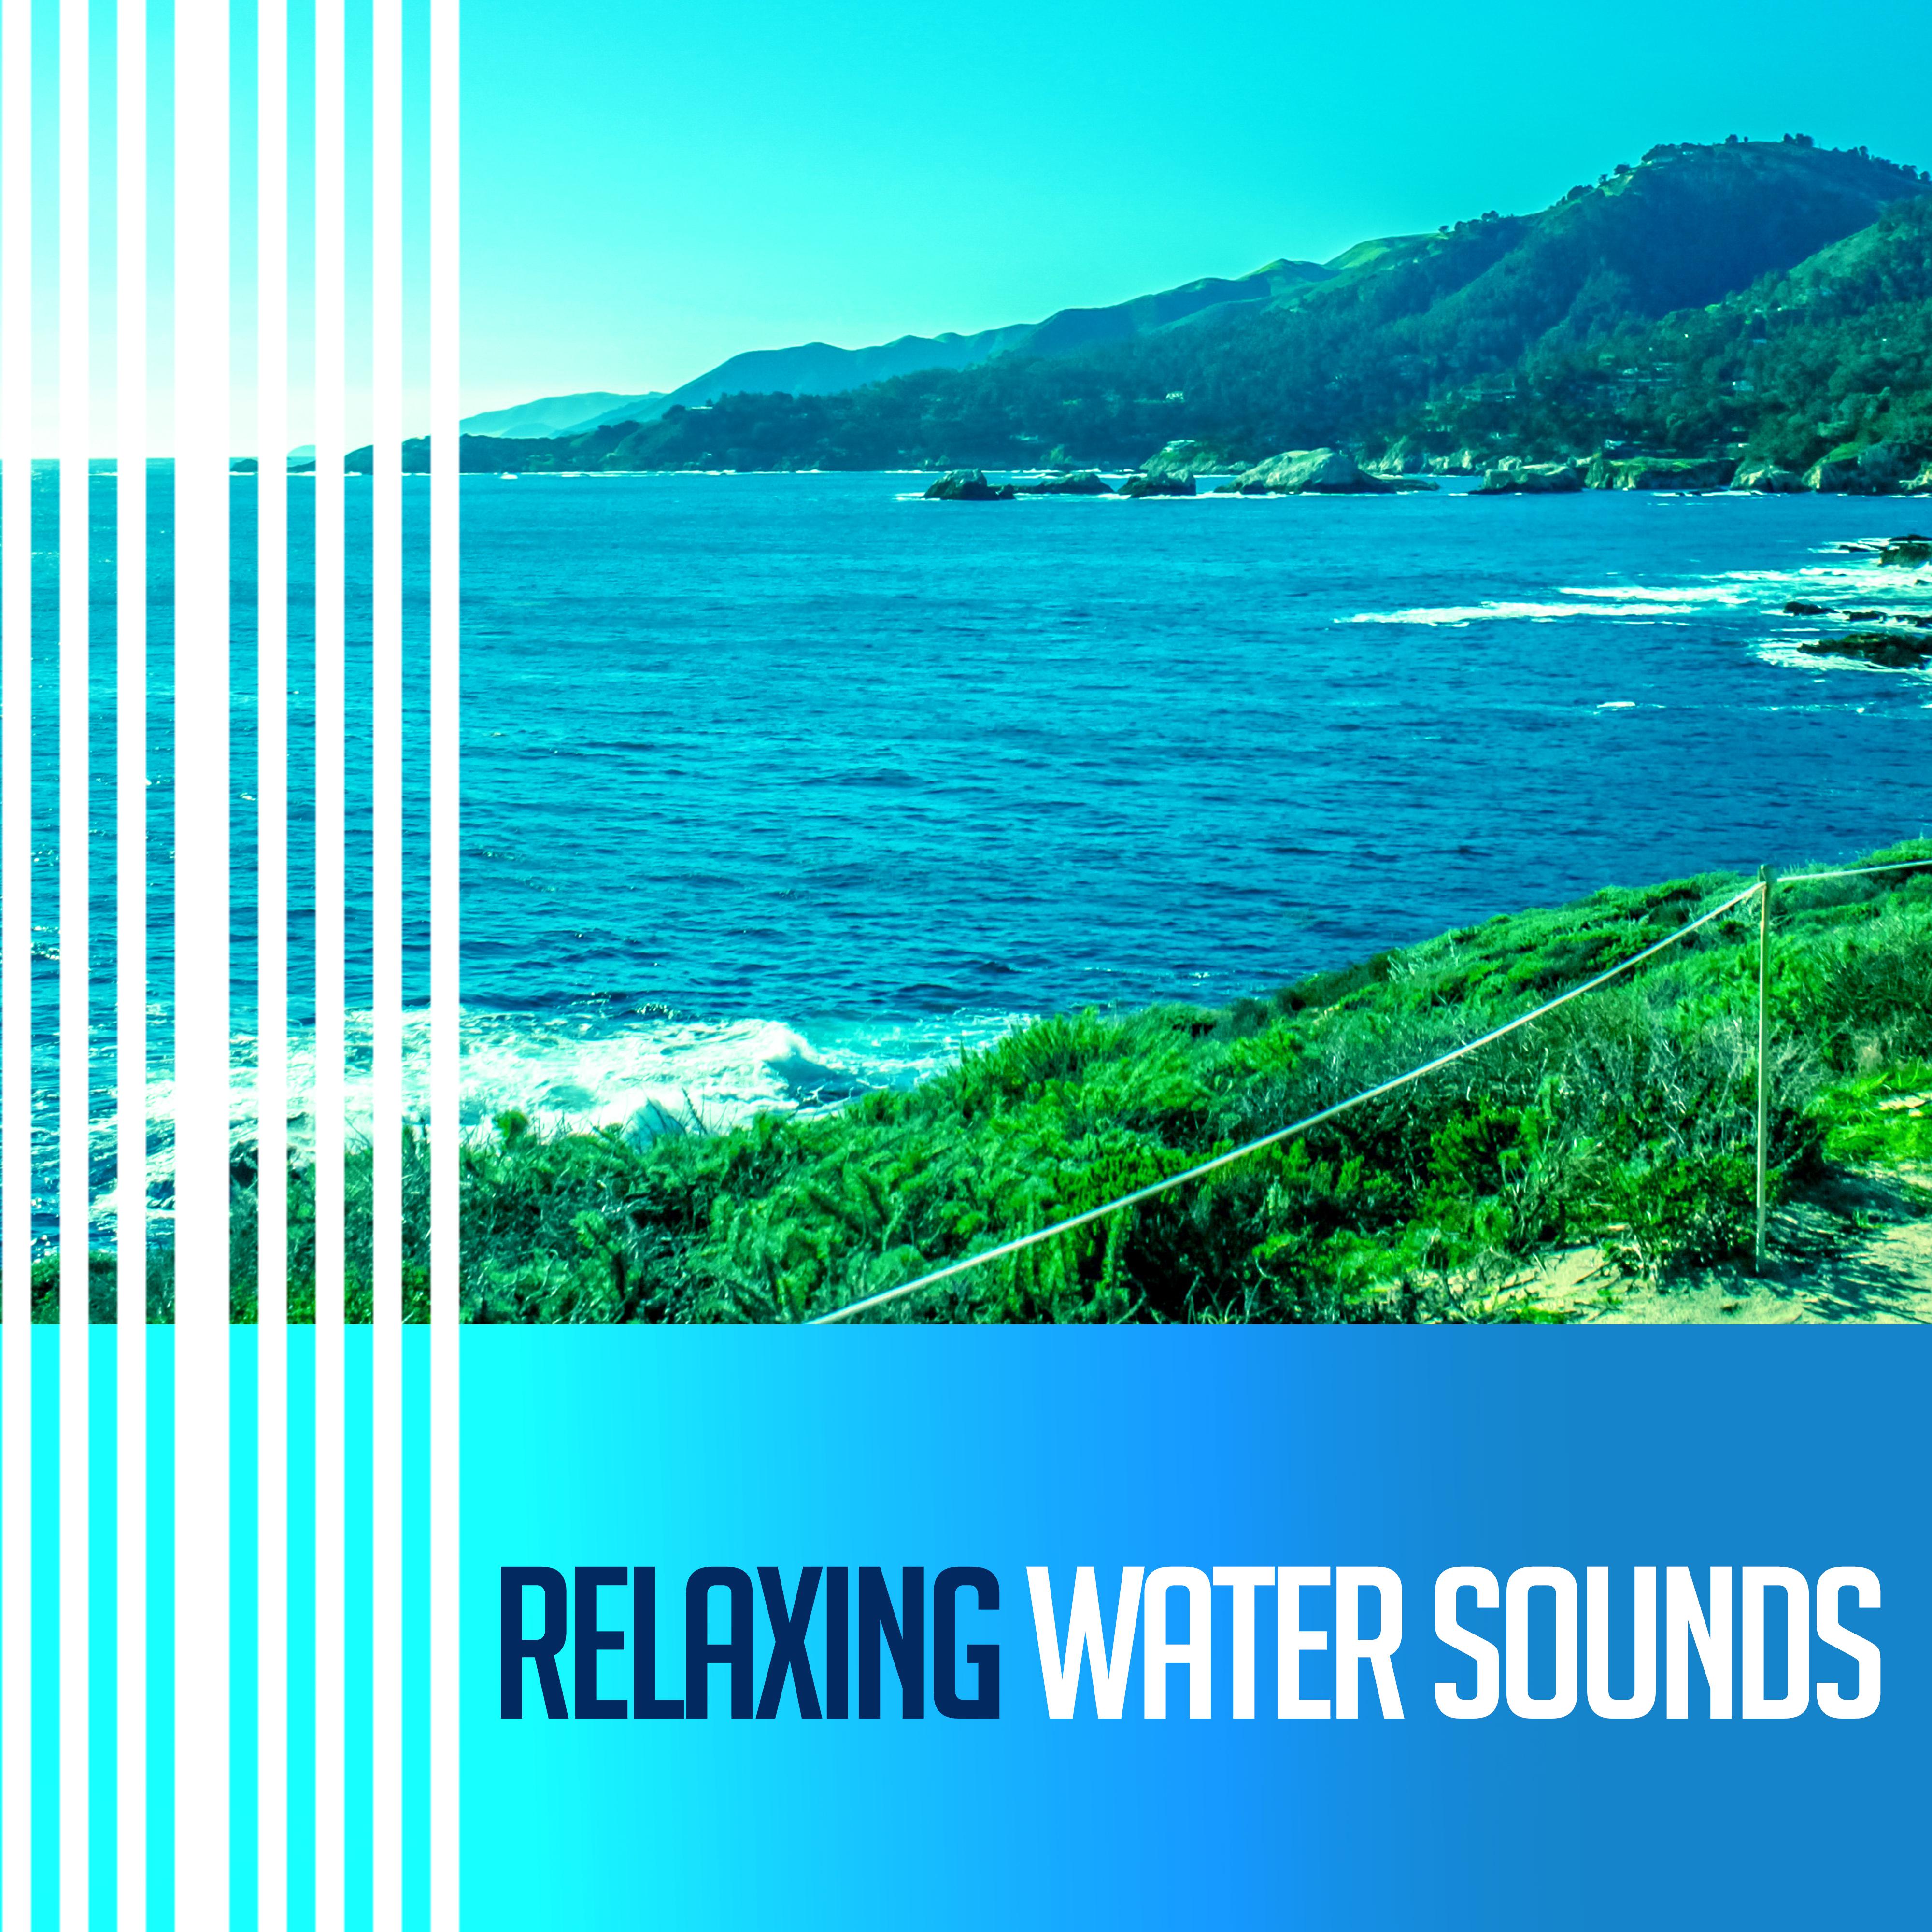 Relaxing Water Sounds – Soothing Waves, Ocean Sounds, Music to Rest & Relax, Inner Silence, Harmony